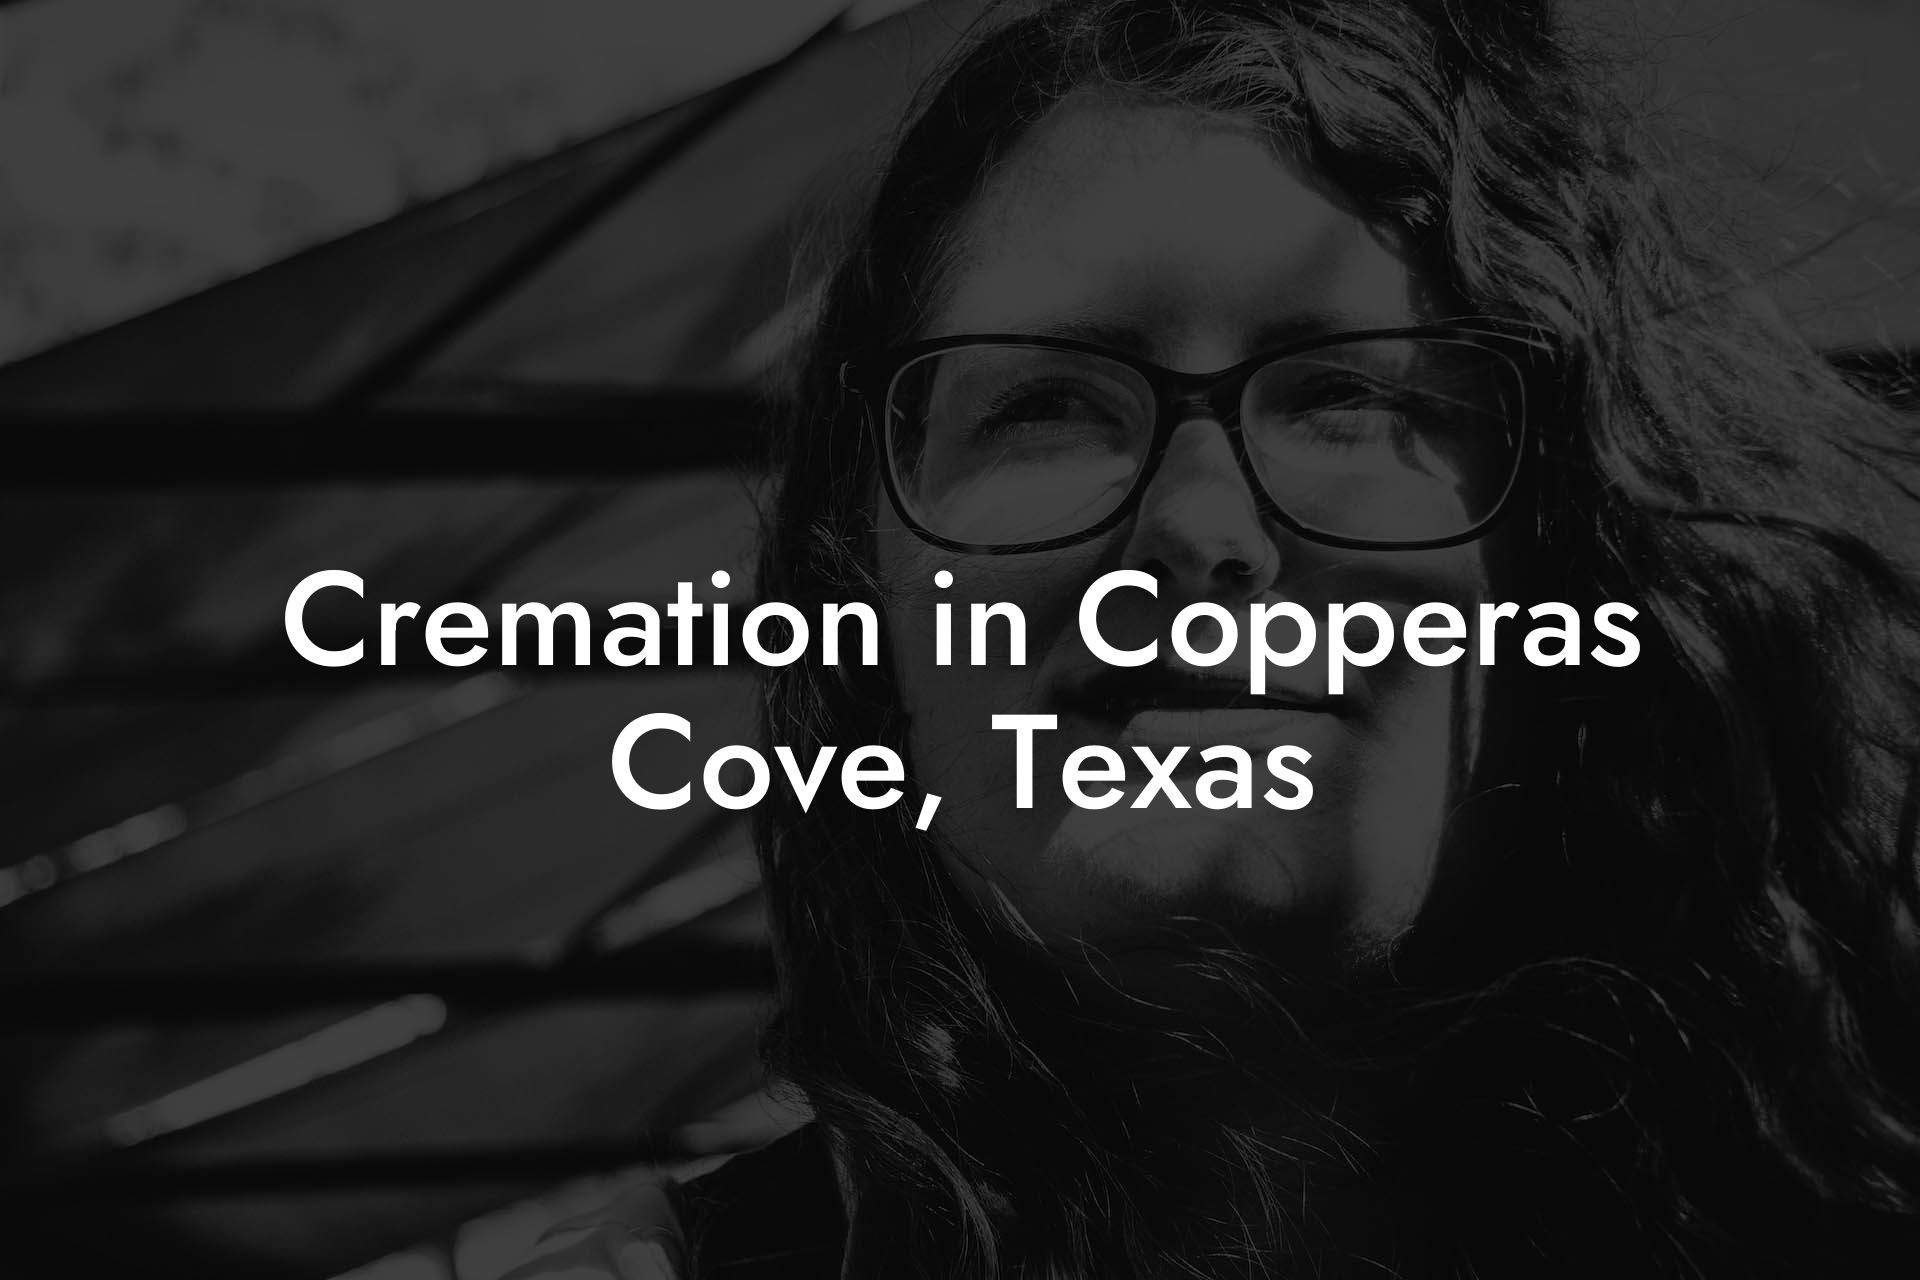 Cremation in Copperas Cove, Texas